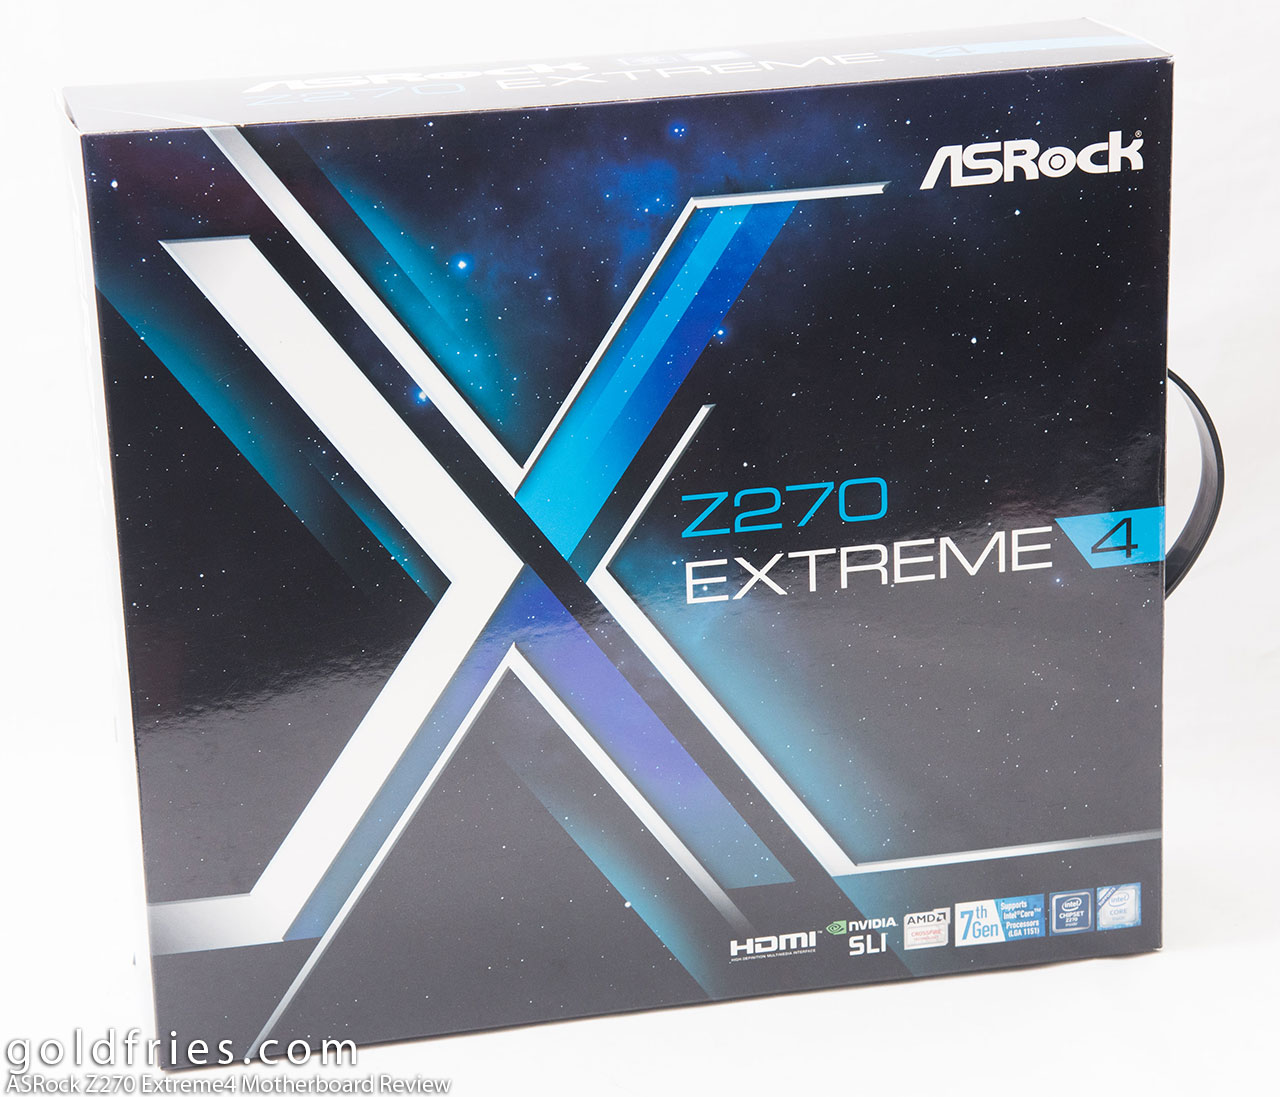 ASRock Z270 Extreme4 Motherboard Review